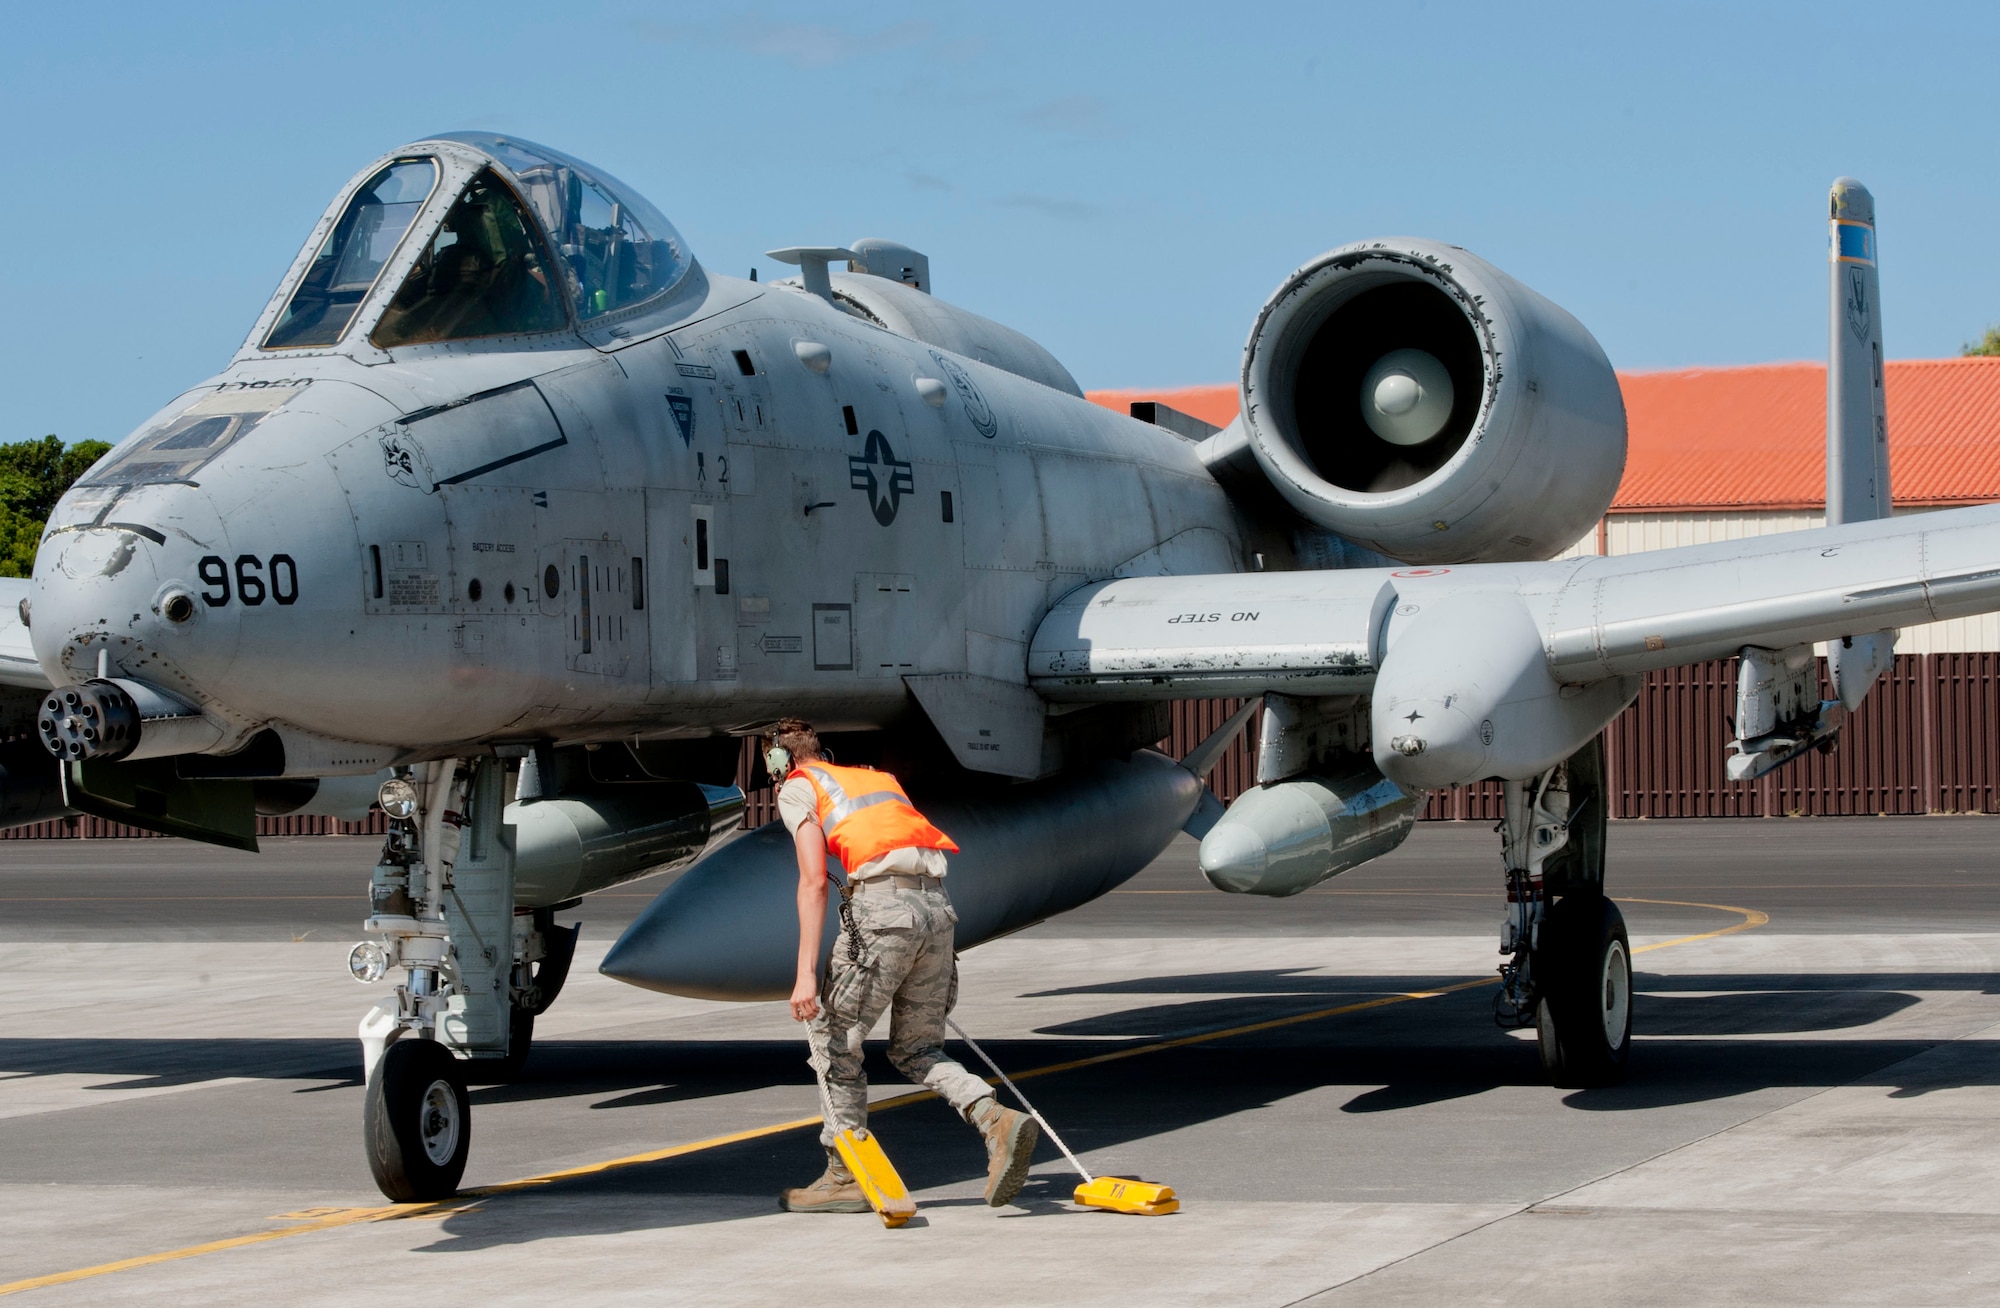 Senior Airman Samuel Clark, a 65th Operations Support Squadron transient alert maintenance technician, performs shutdown procedures on an A-10 Thunderbolt II on Lajes Field, Azores, Portugal, August 1, 2015. The 354th Expeditionary Fighter Squadron returns home after deploying 12 A-10s as part of a Theater Security Package in support of Operation Atlantic Resolve, to Spangdahlem AB, Germany where they conducted training alongside our NATO allies to strengthen interoperability and to demonstrate U.S. commitment to the security and stability of Europe. (U.S. Air Force photo by Master Sgt. Bradley C. Church).